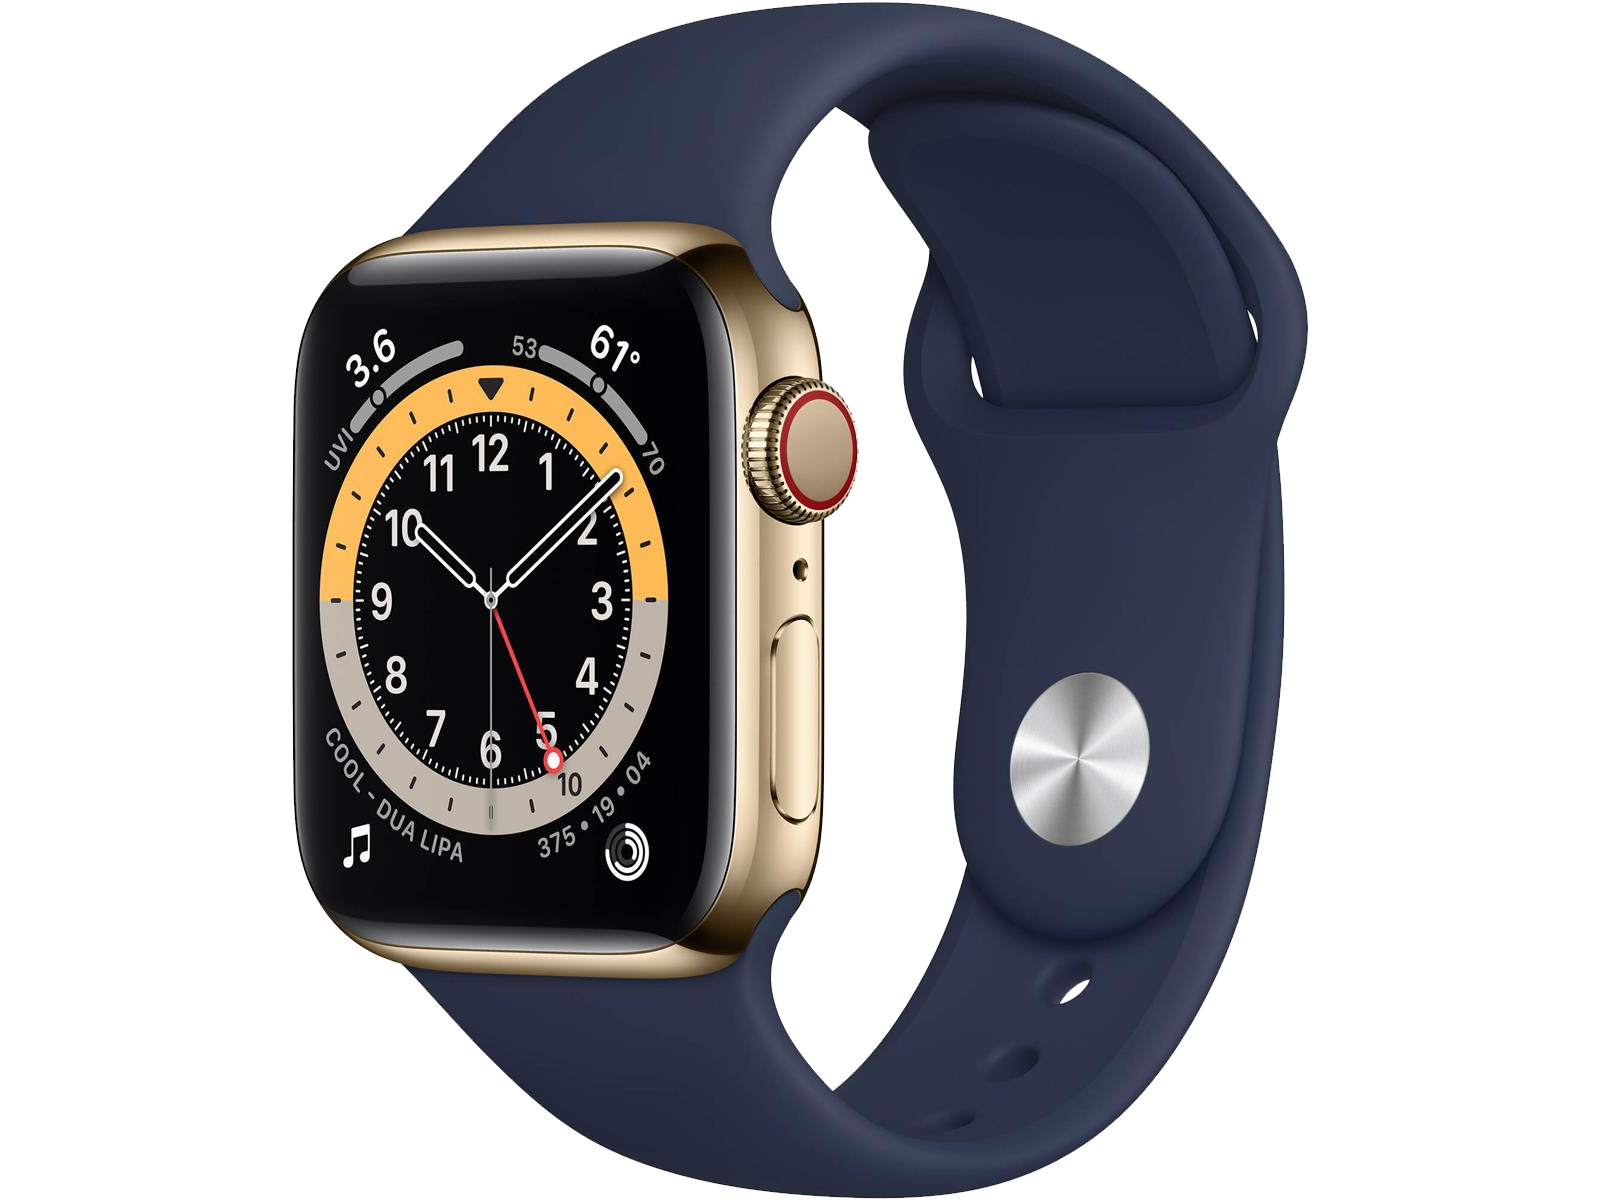 Apple Watch Series 6 with Gold Case and Navy Sport Band